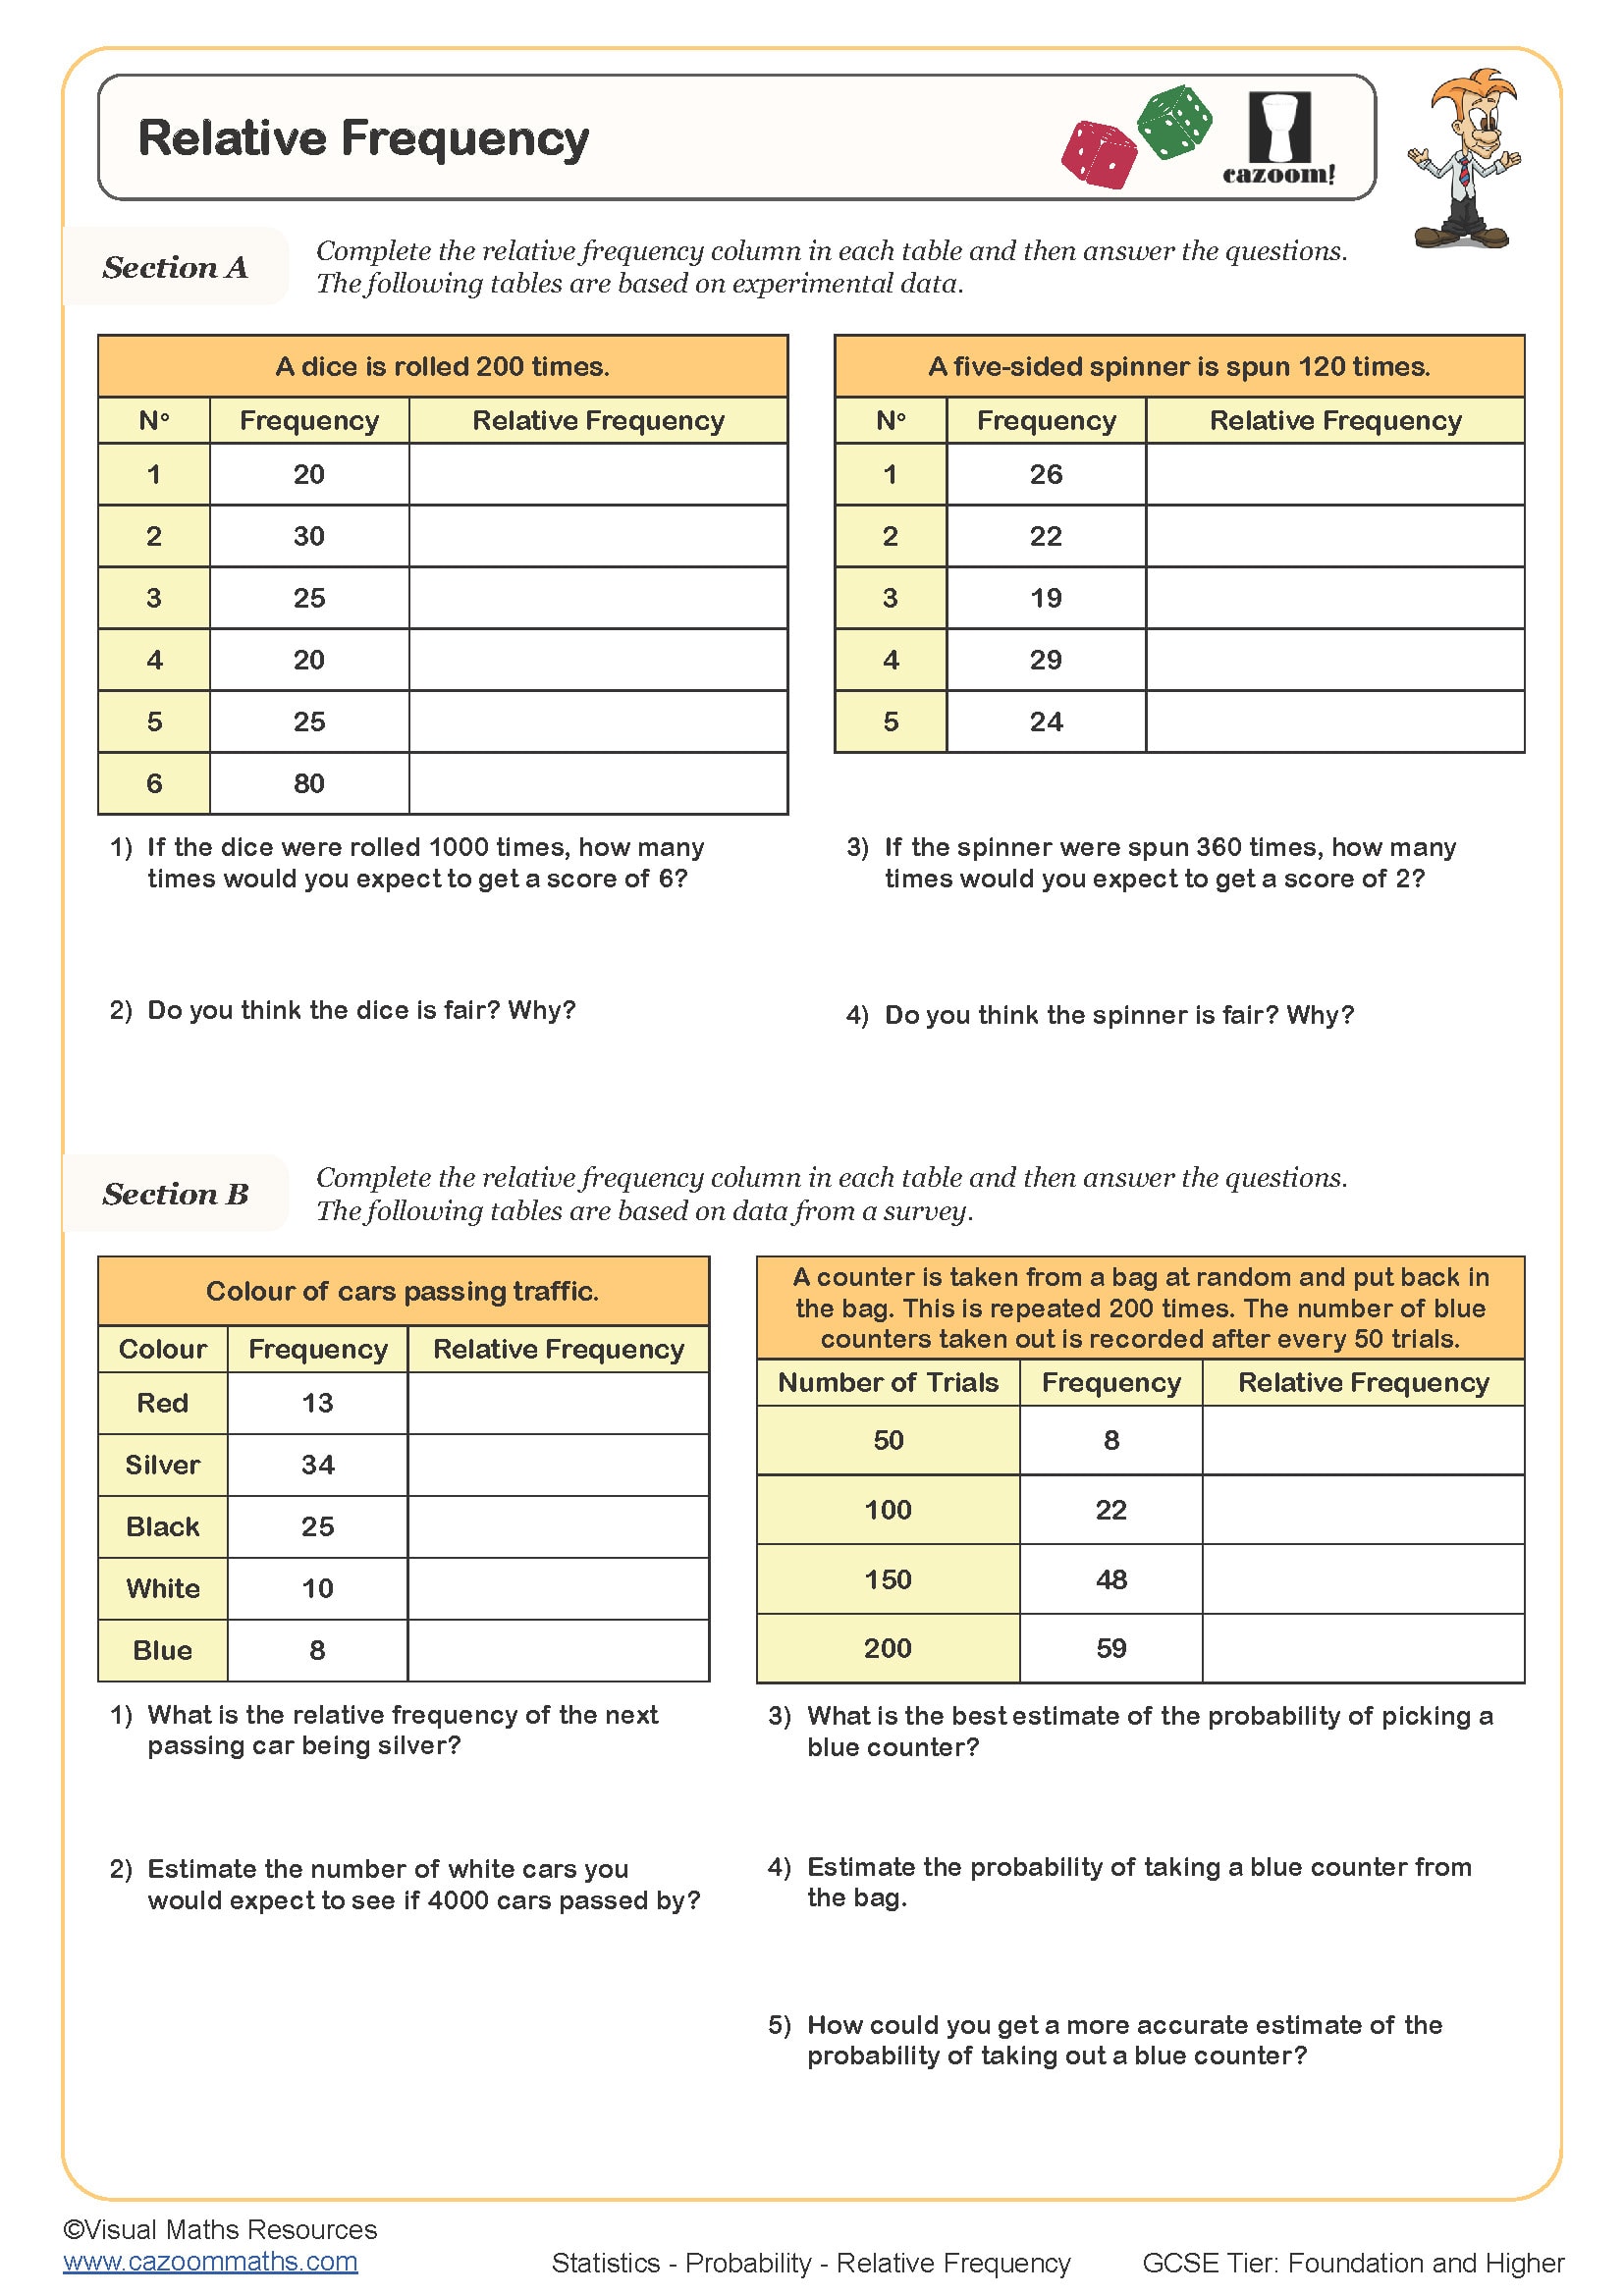 Relative Frequency Worksheet fit for students in year 9, 10 and 11